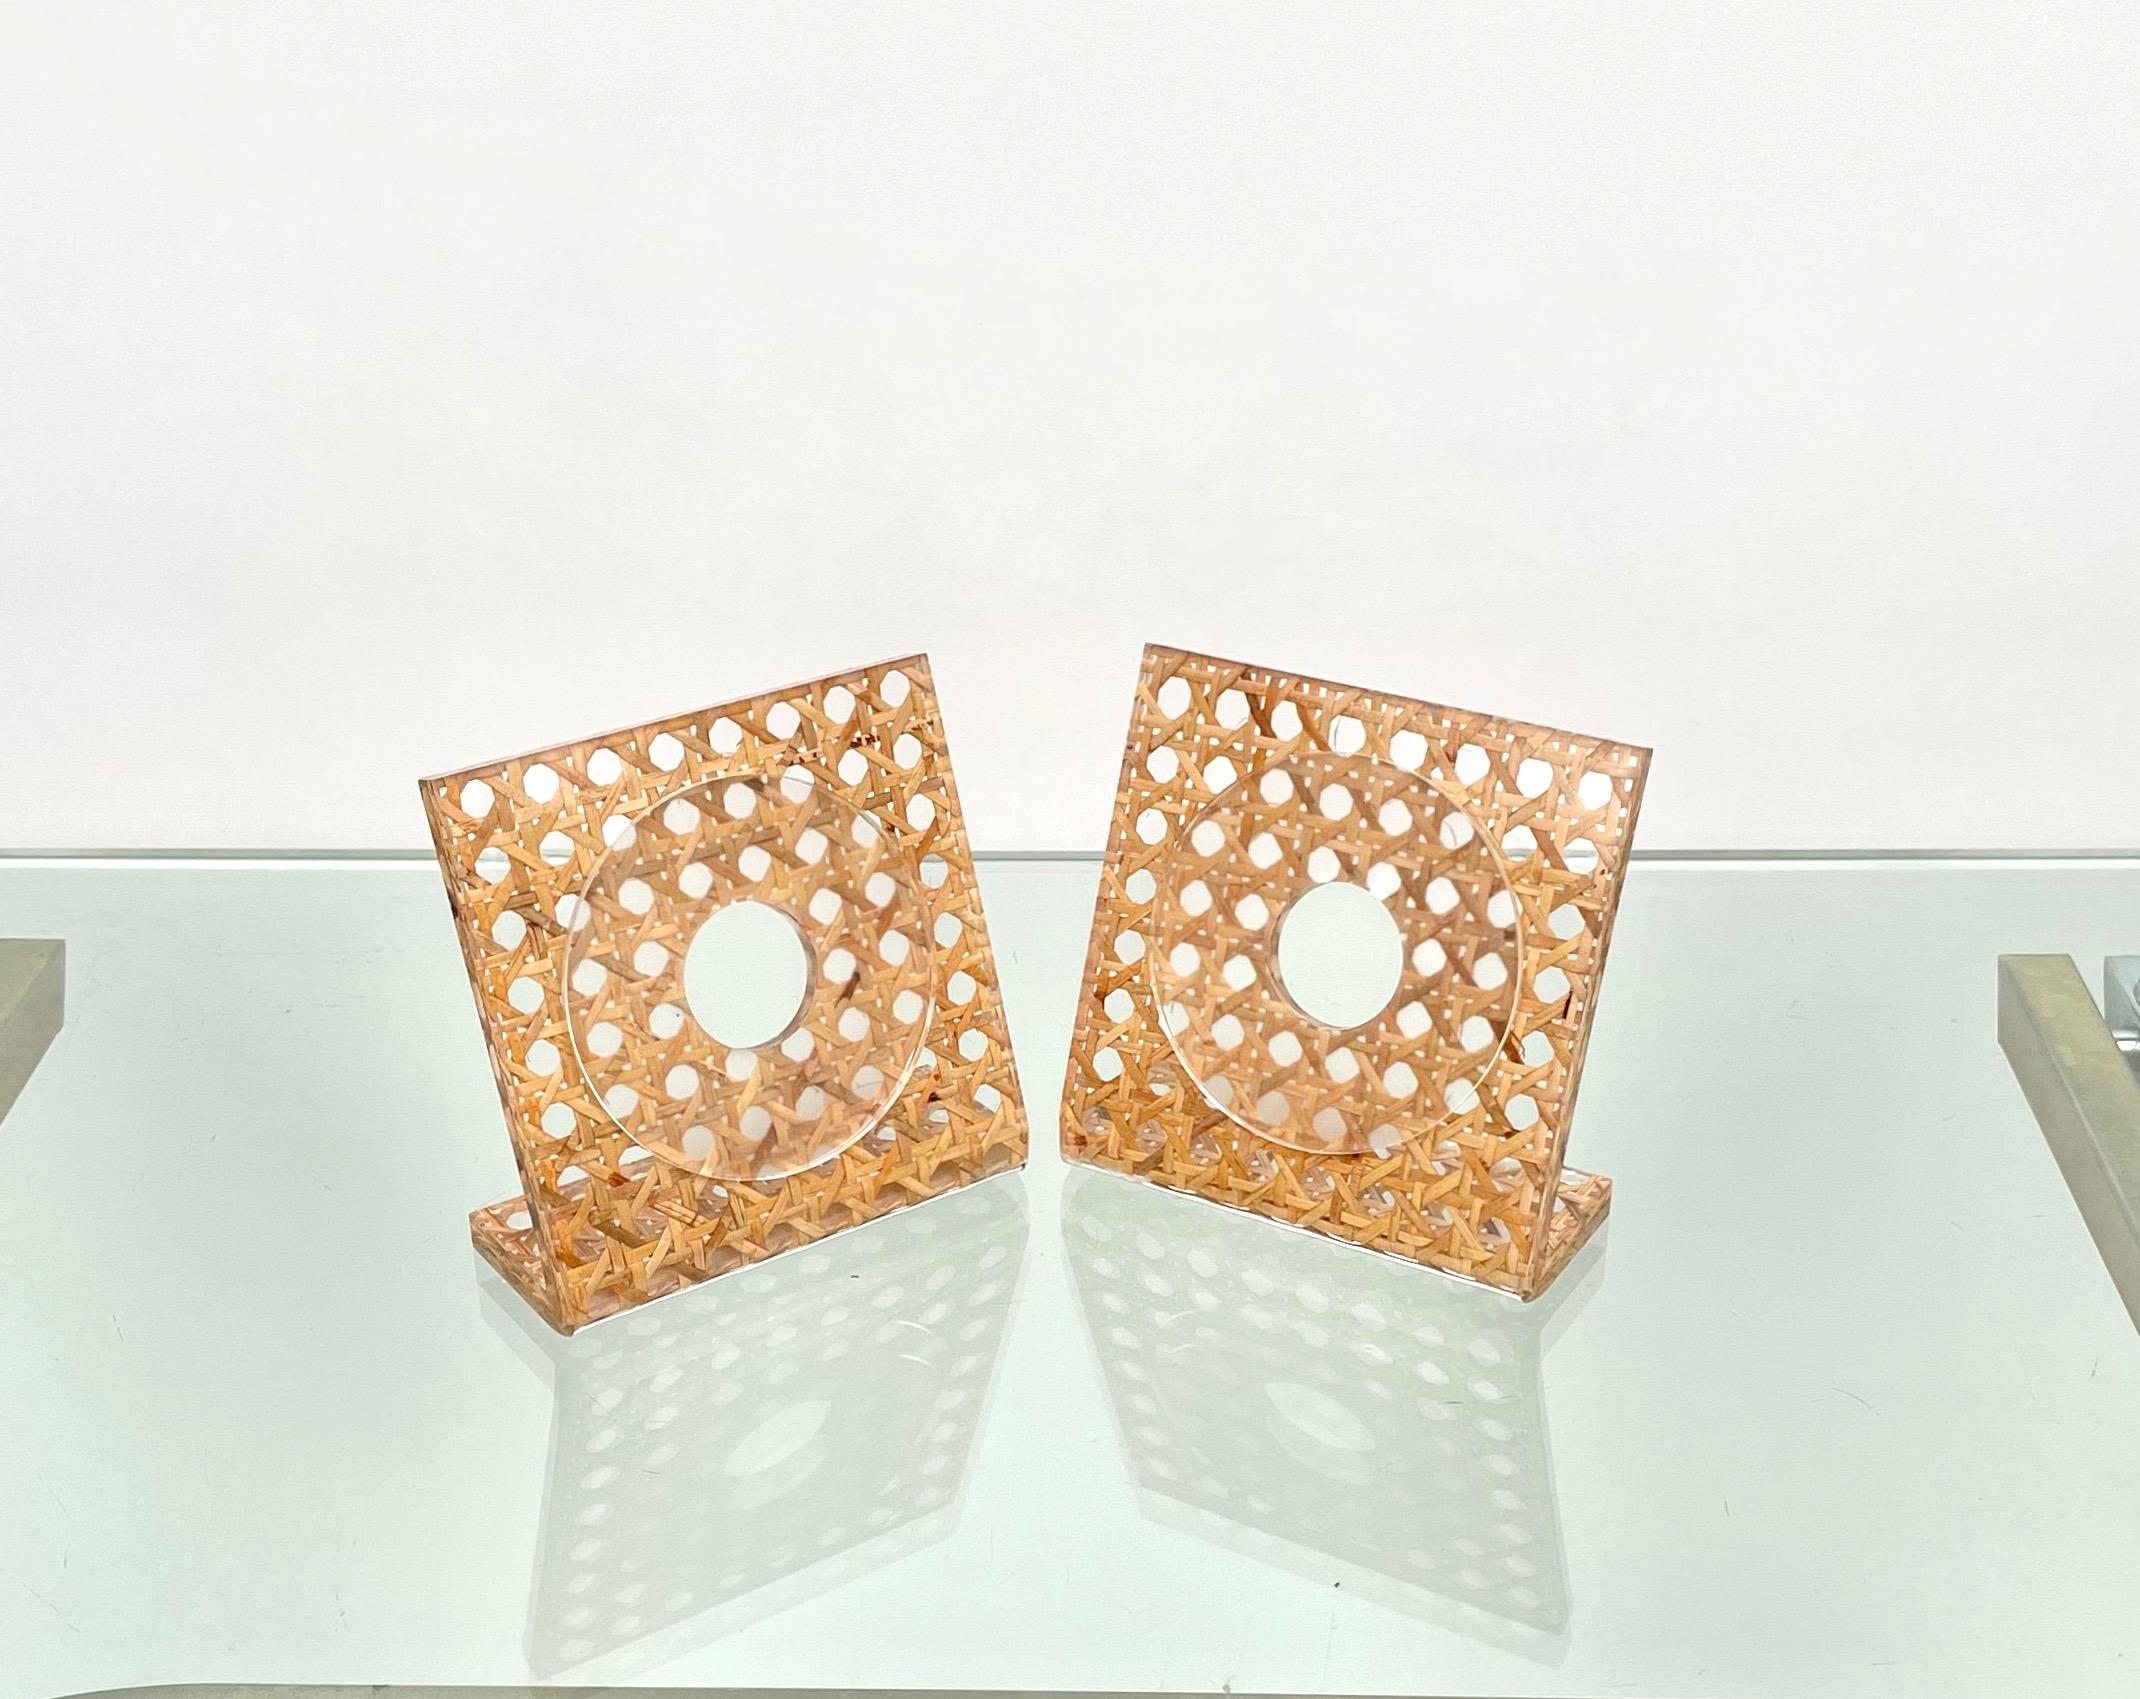 Pair of Lucite & Rattan Squared Picture Frame Christian Dior Style, Italy, 1970s For Sale 9